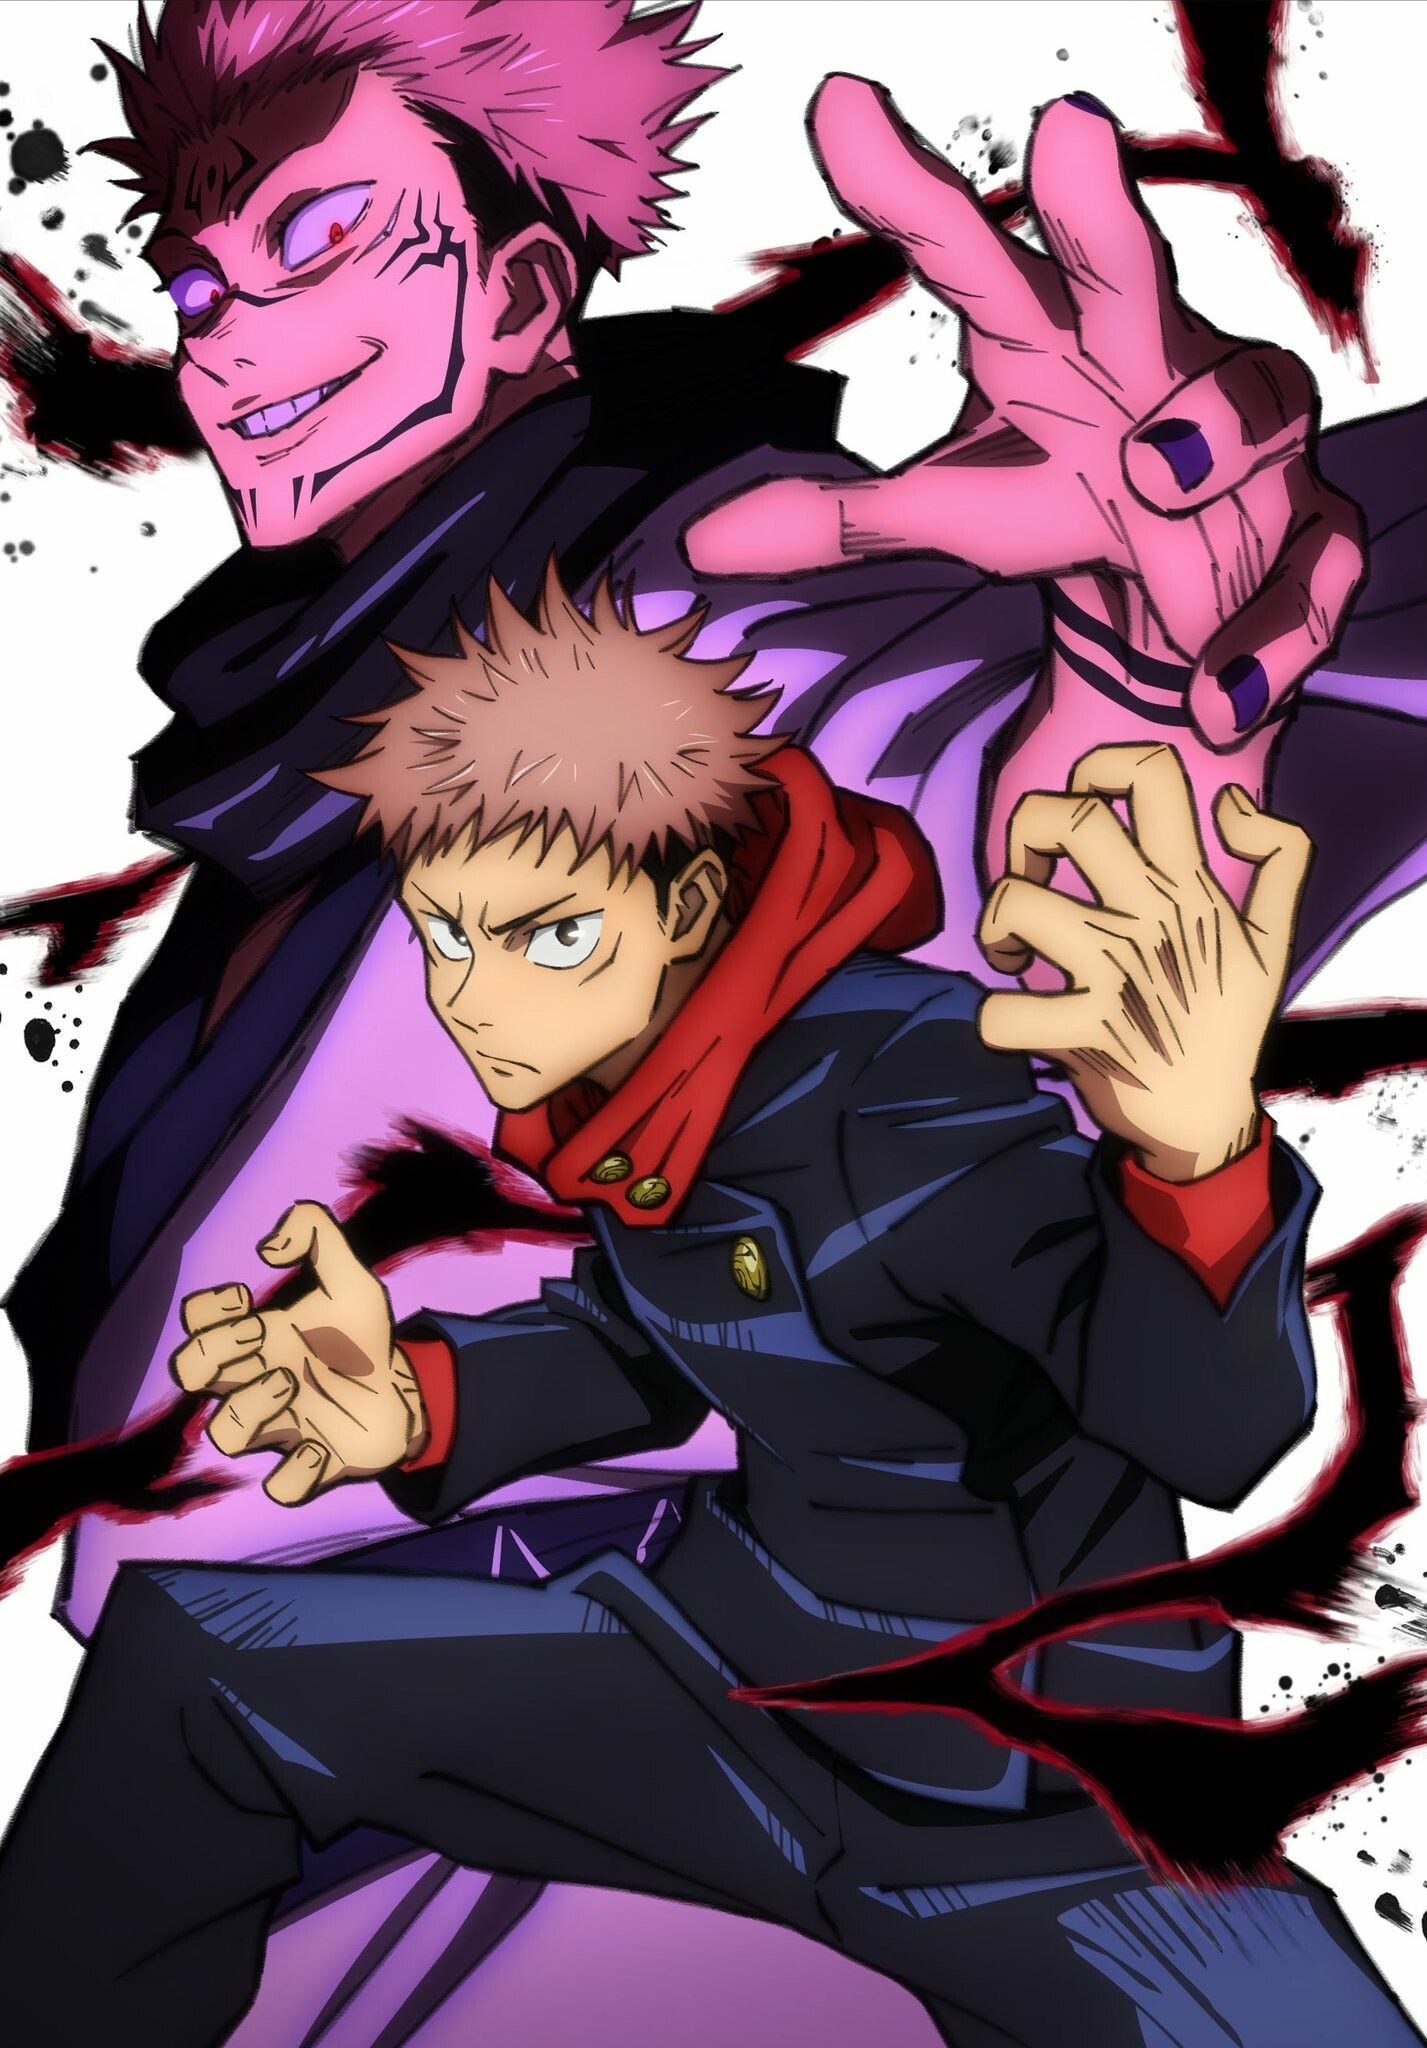 Jujutsu Kaisen (TV Series): Anime adaptation, Announced in the 52nd issue of Weekly Shonen Jump. 1430x2050 HD Wallpaper.